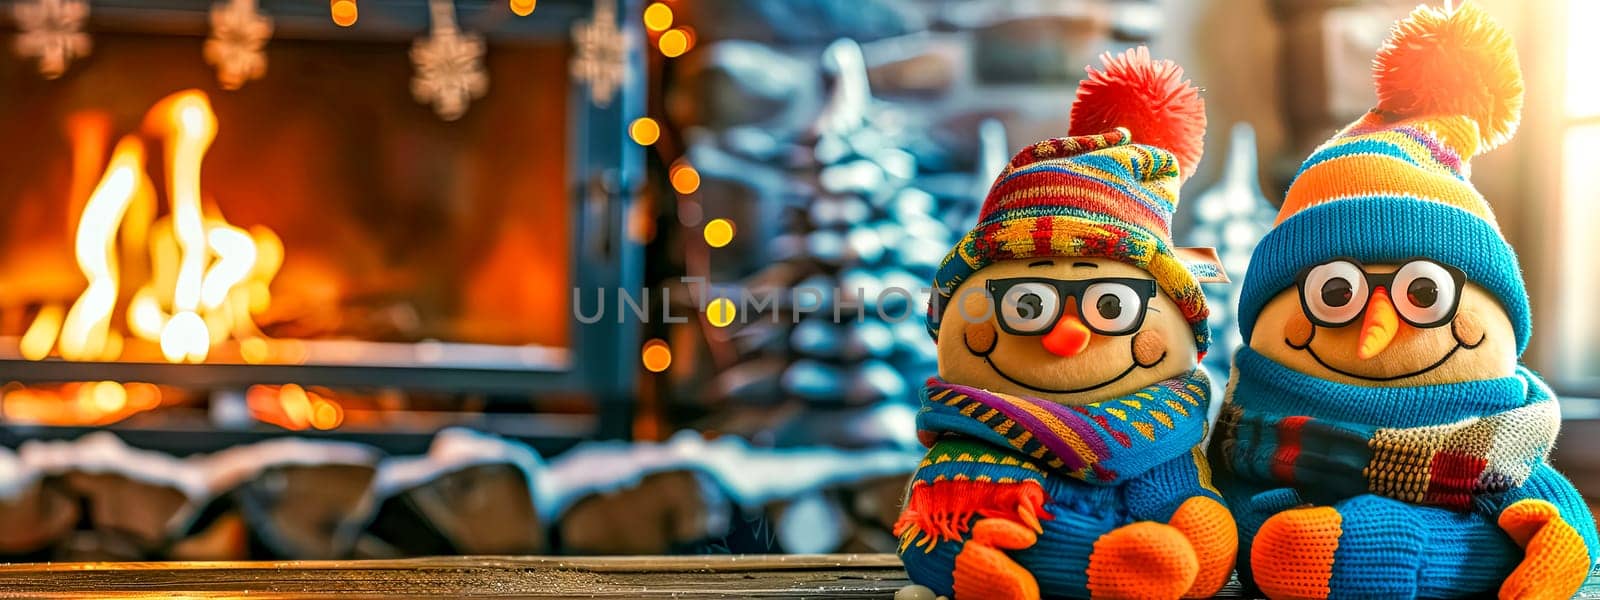 Cozy Knitted Snowmen by Fireplace by Edophoto